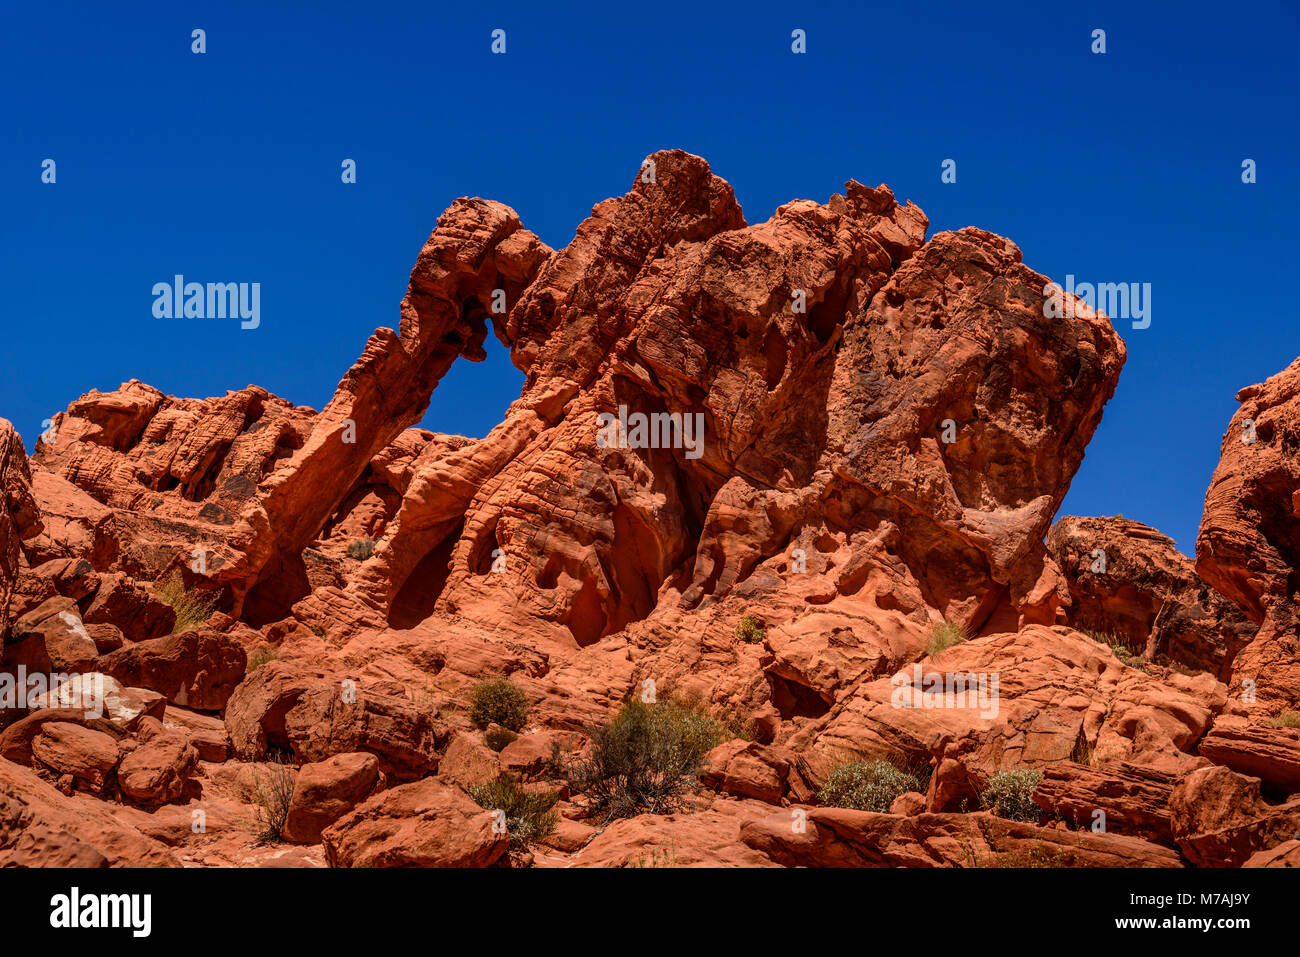 The USA, Nevada, Clark County, Overton, Valley of Fire State Park, Elephant rock Stock Photo